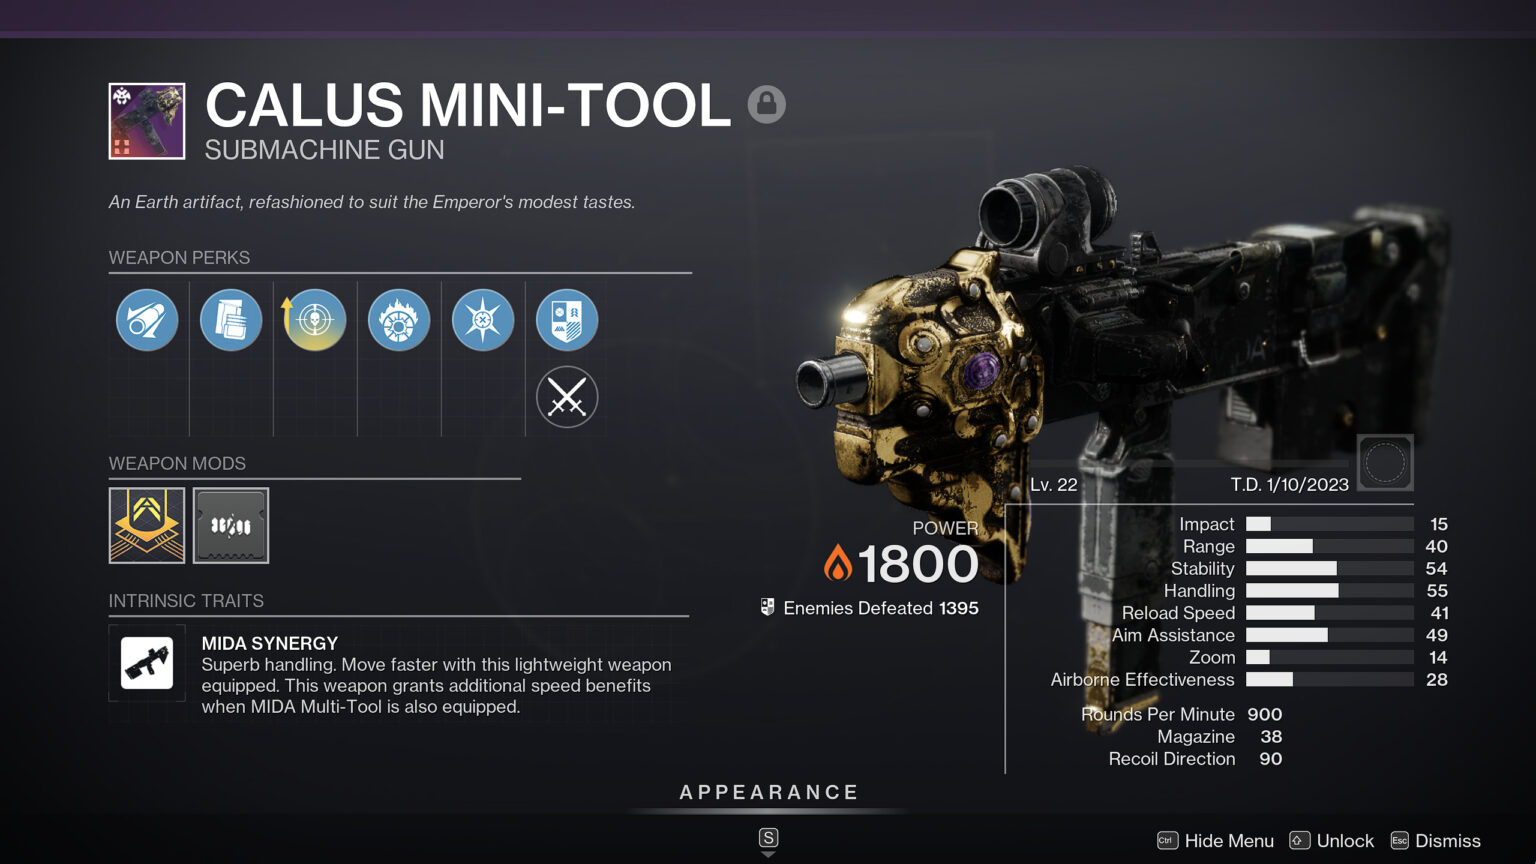 Destiny 2 CALUS MiniTool God Rolls and How to get it